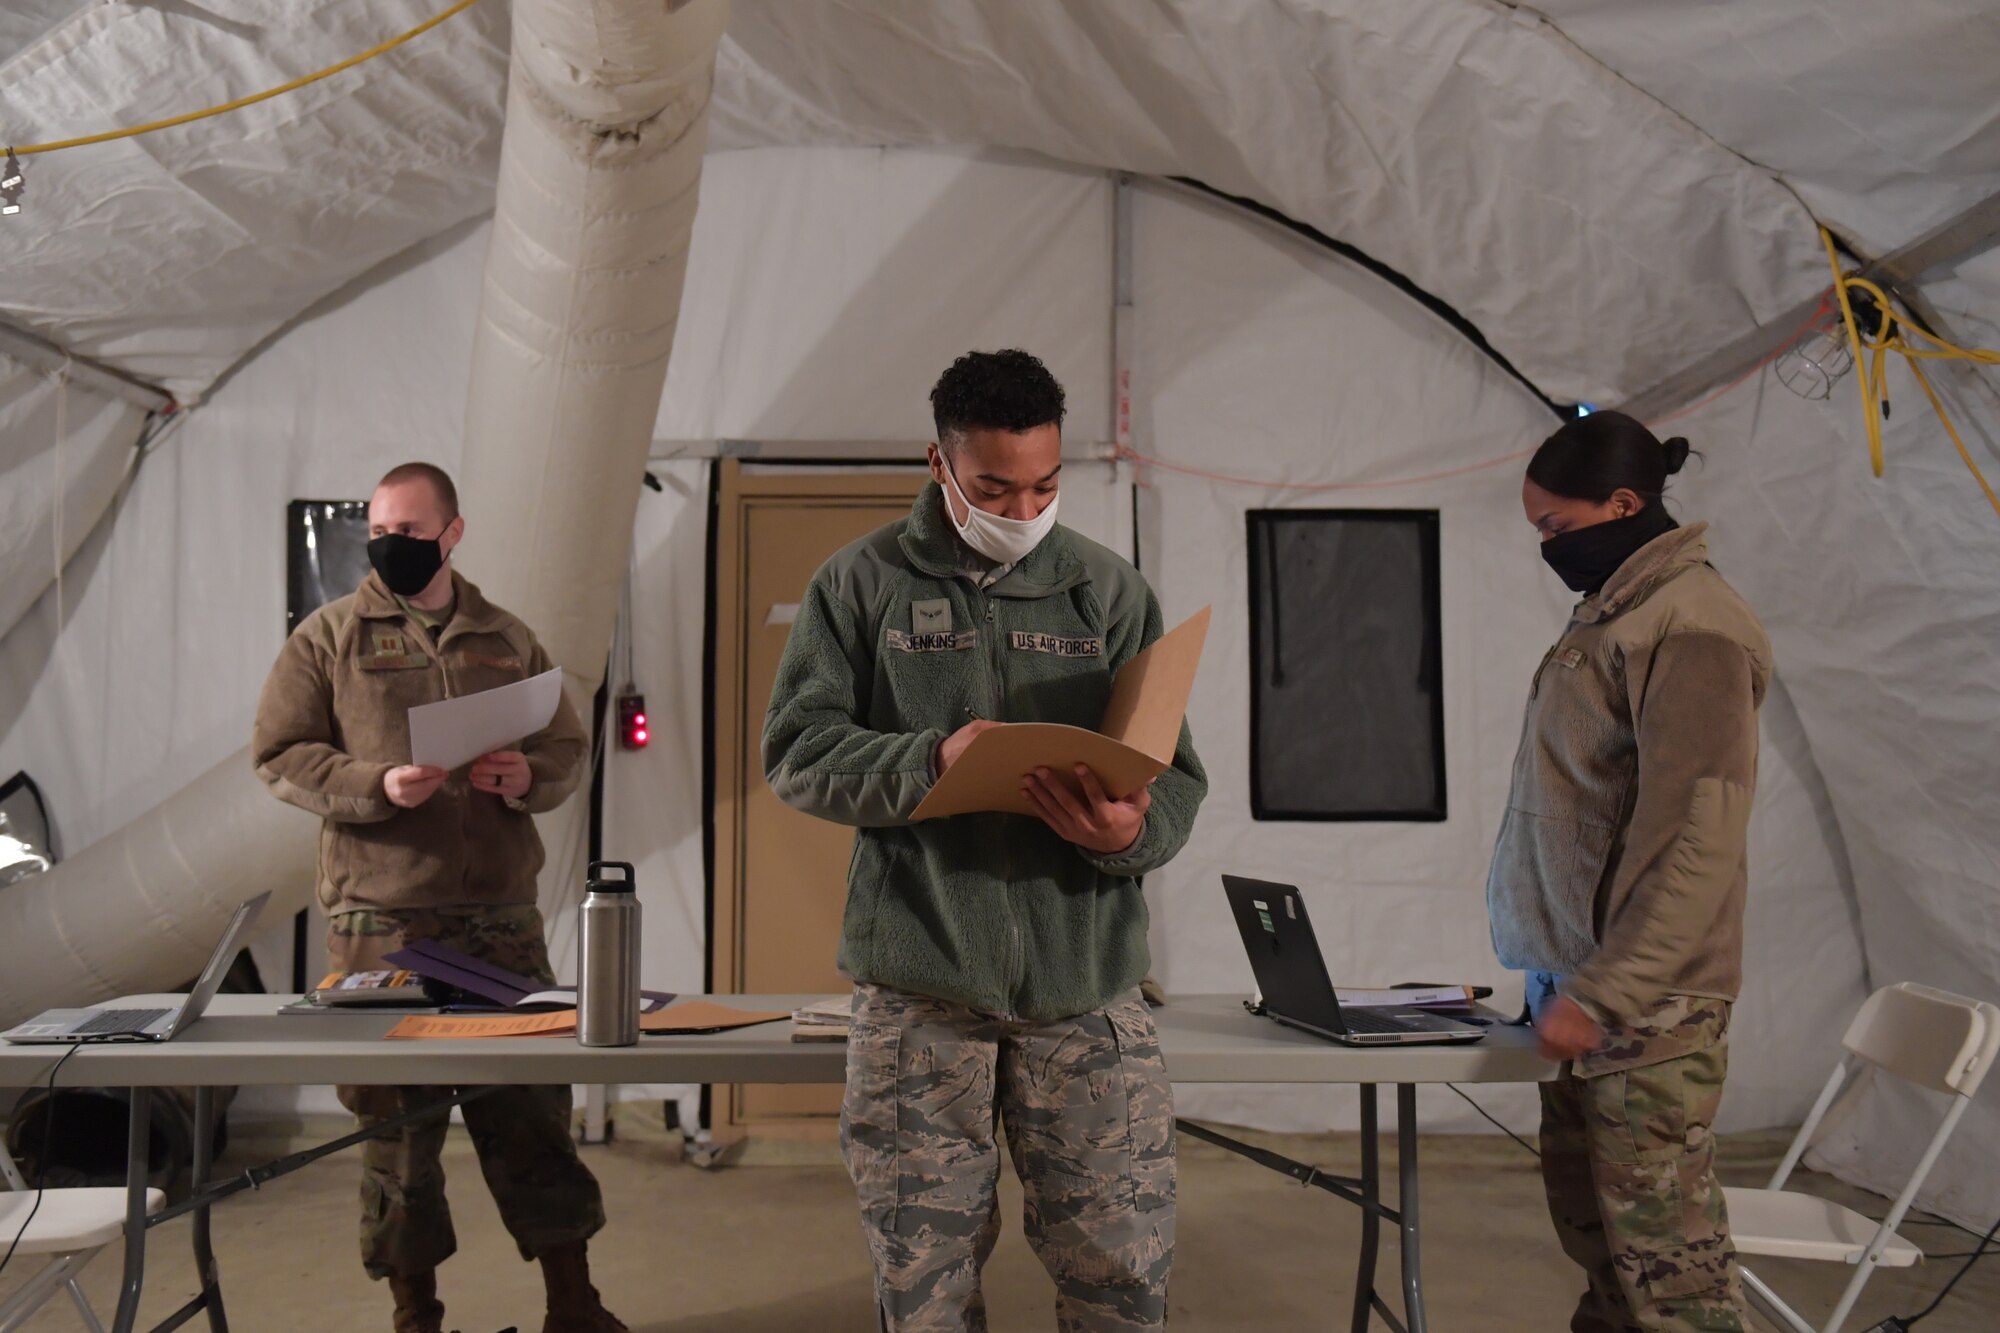 Three Airmen standing in a tent.